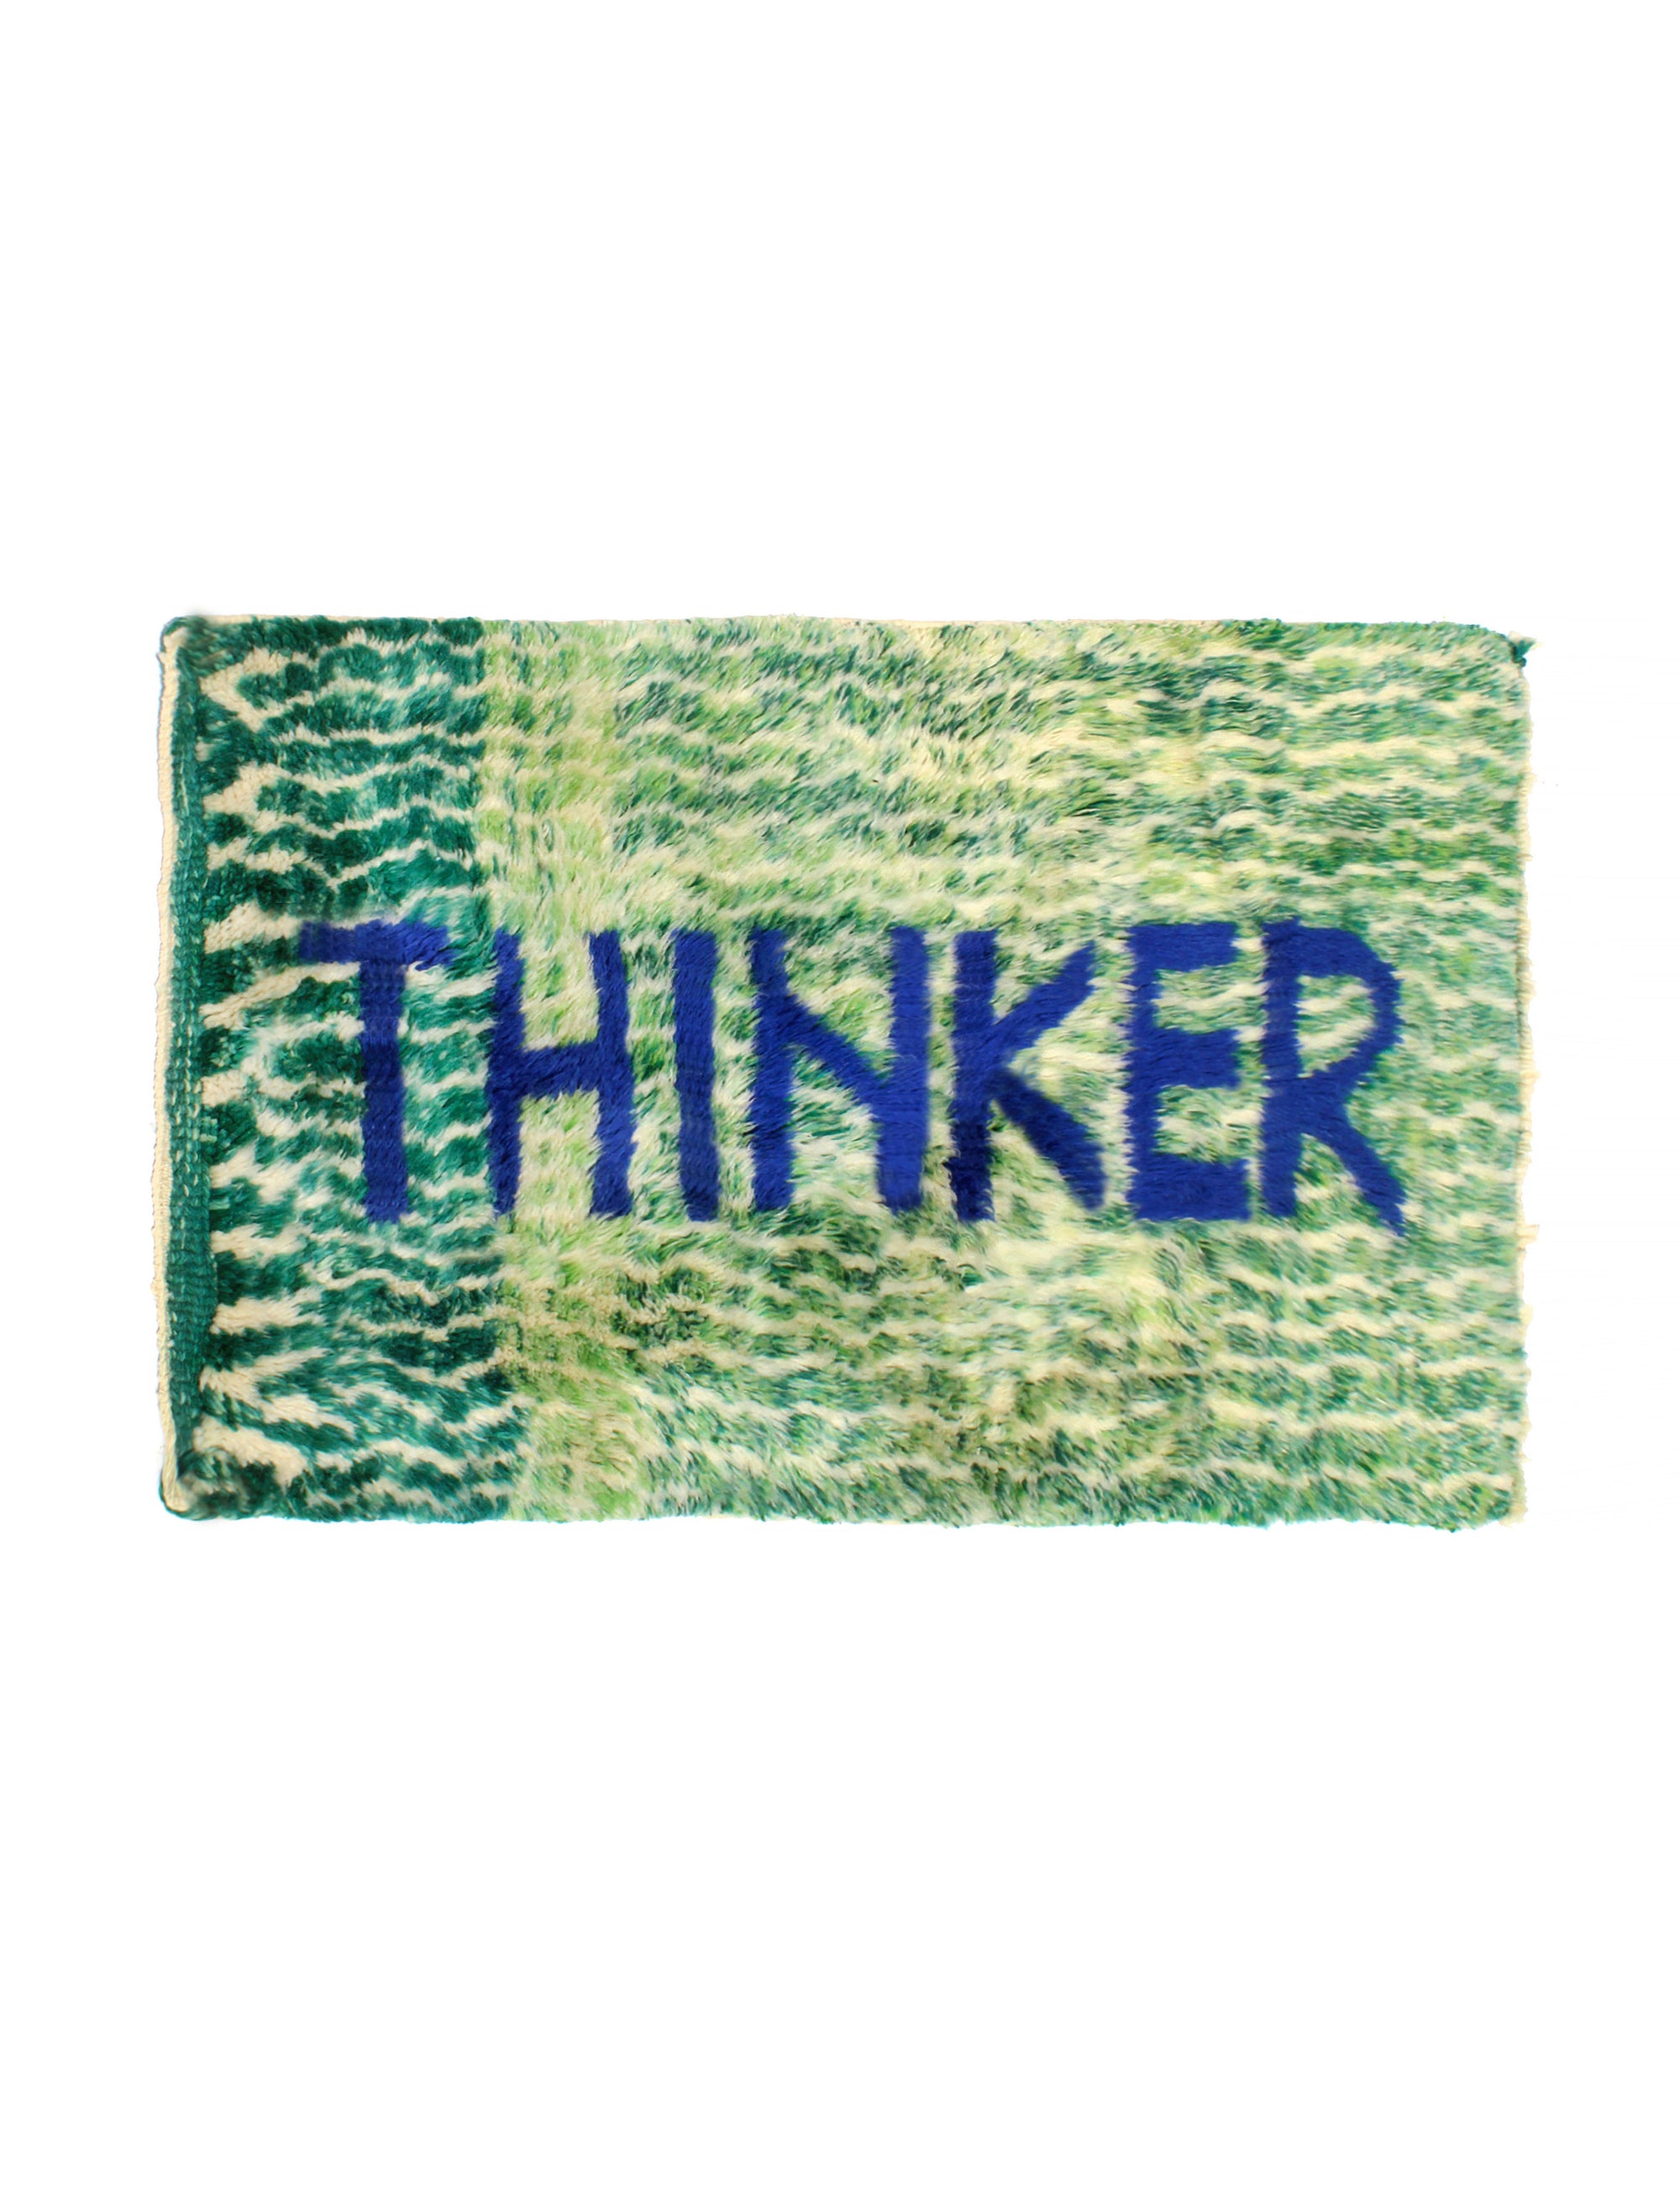 Introducing the 'Verdant Thinker Rug,' where the profound 'Thinker' letter is meticulously woven in blue yarn. Set against a backdrop of unique green and ivory curved wave lines, this rug brings a touch of intellectual charm to your space. Elevate your home with its artistic blend of colors and textures, creating a vibrant and thoughtful ambiance that resonates with modern sophistication.